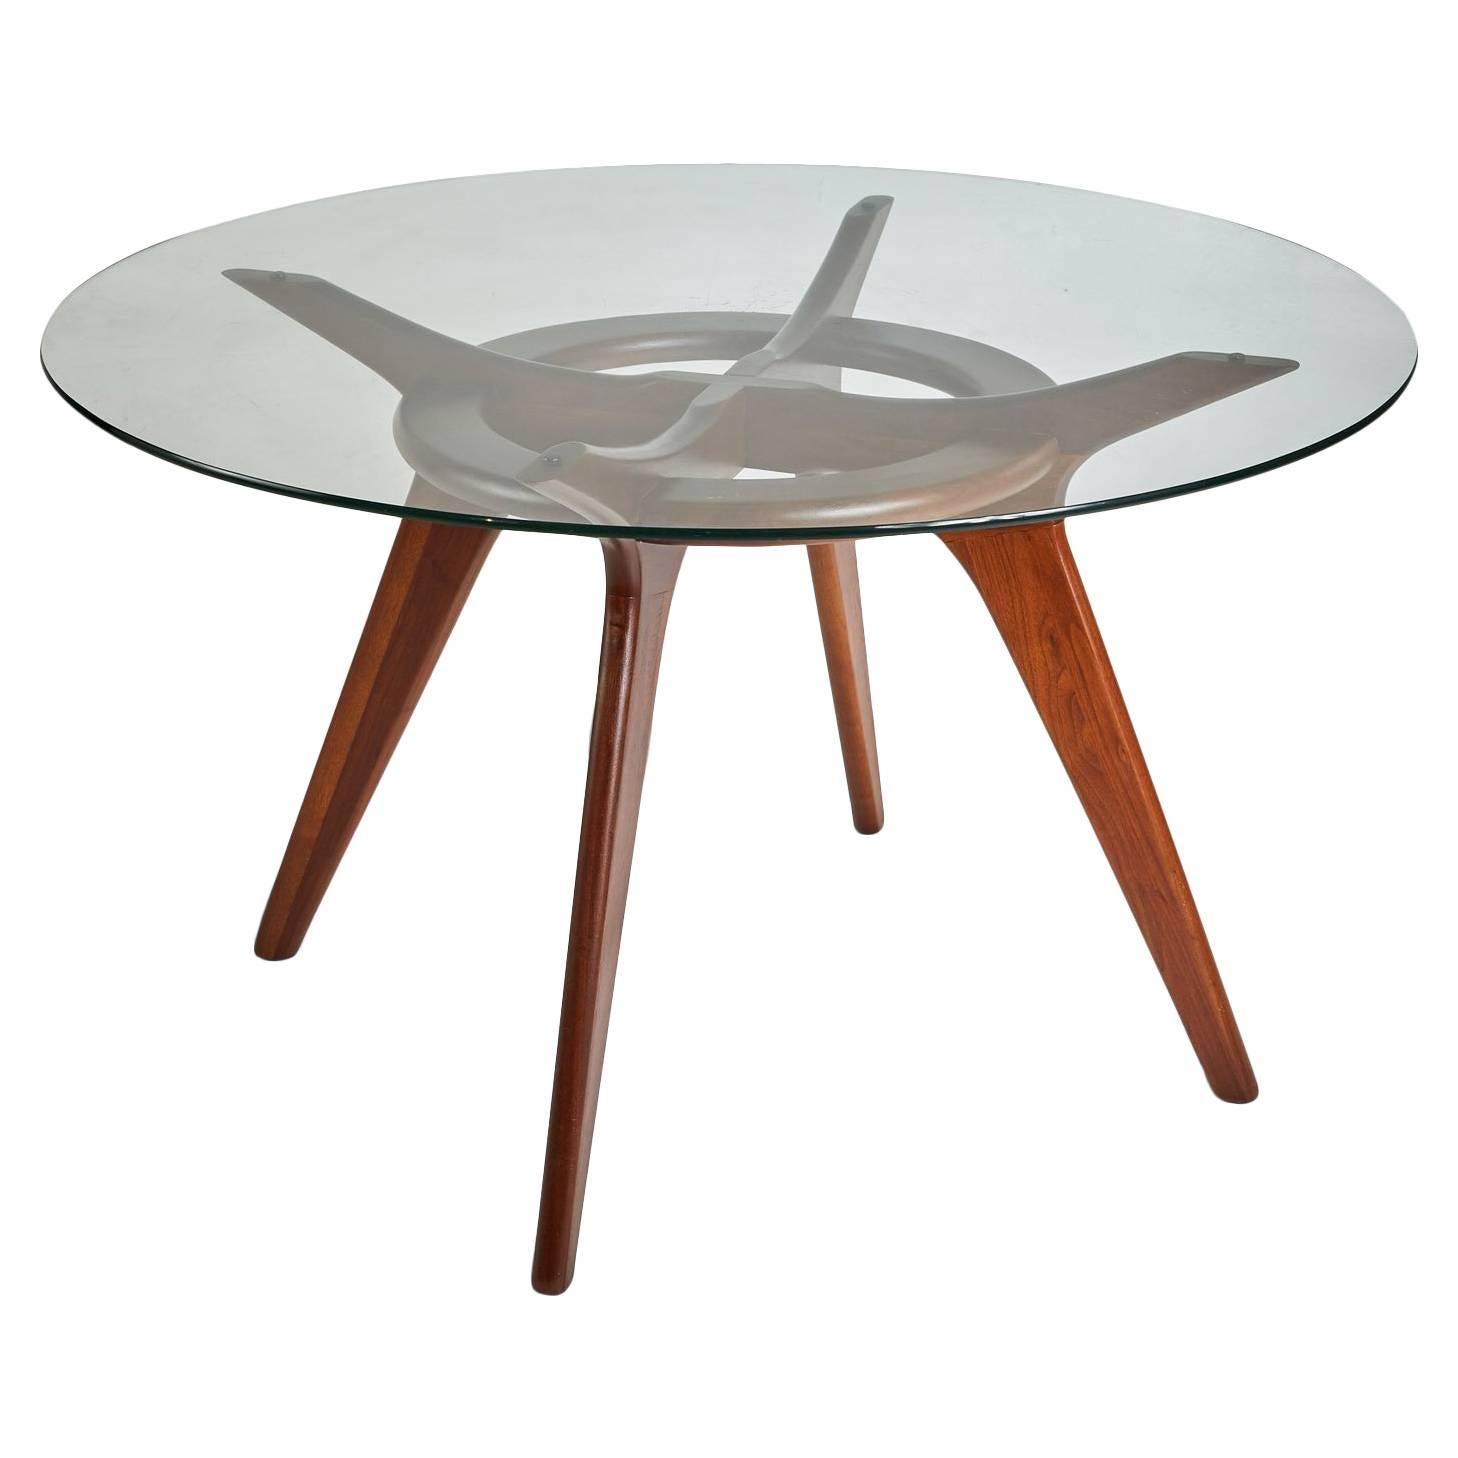 Adrian Pearsall Compass Walnut Dining Table for Craft Associates